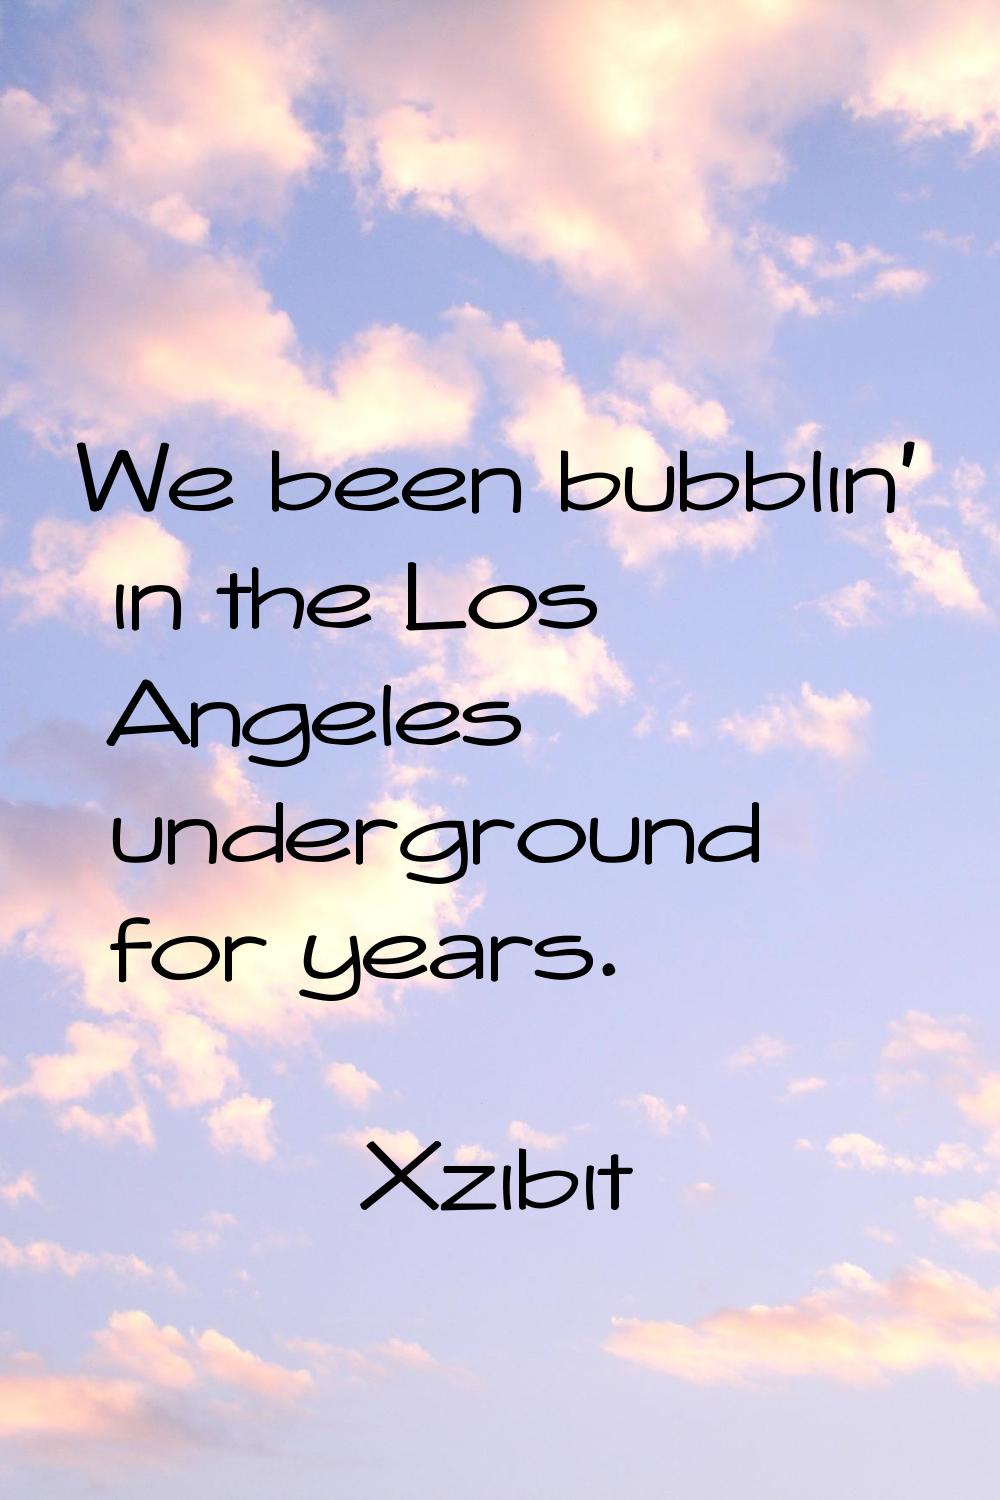 We been bubblin' in the Los Angeles underground for years.